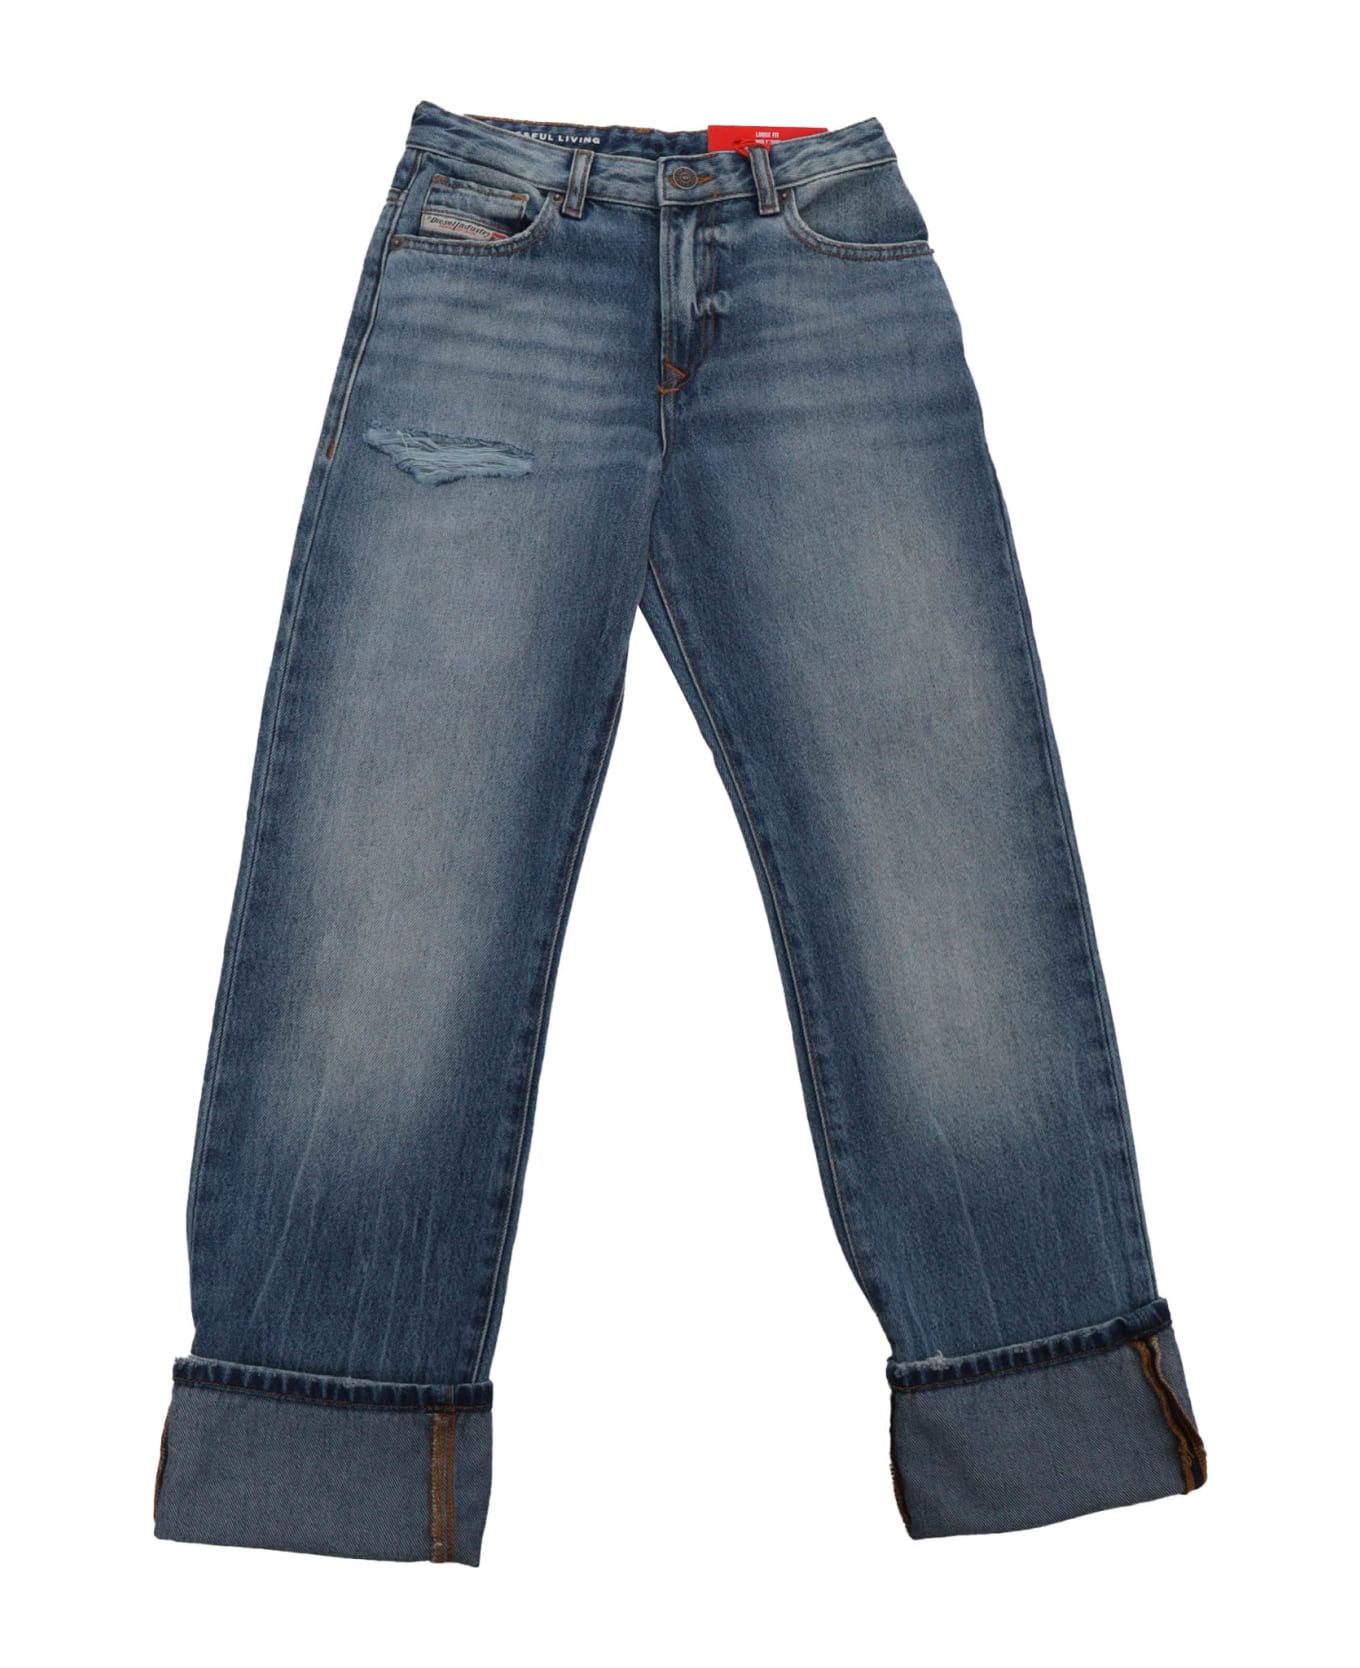 Diesel Blue Jeans With Cuffs - BLUE ボトムス